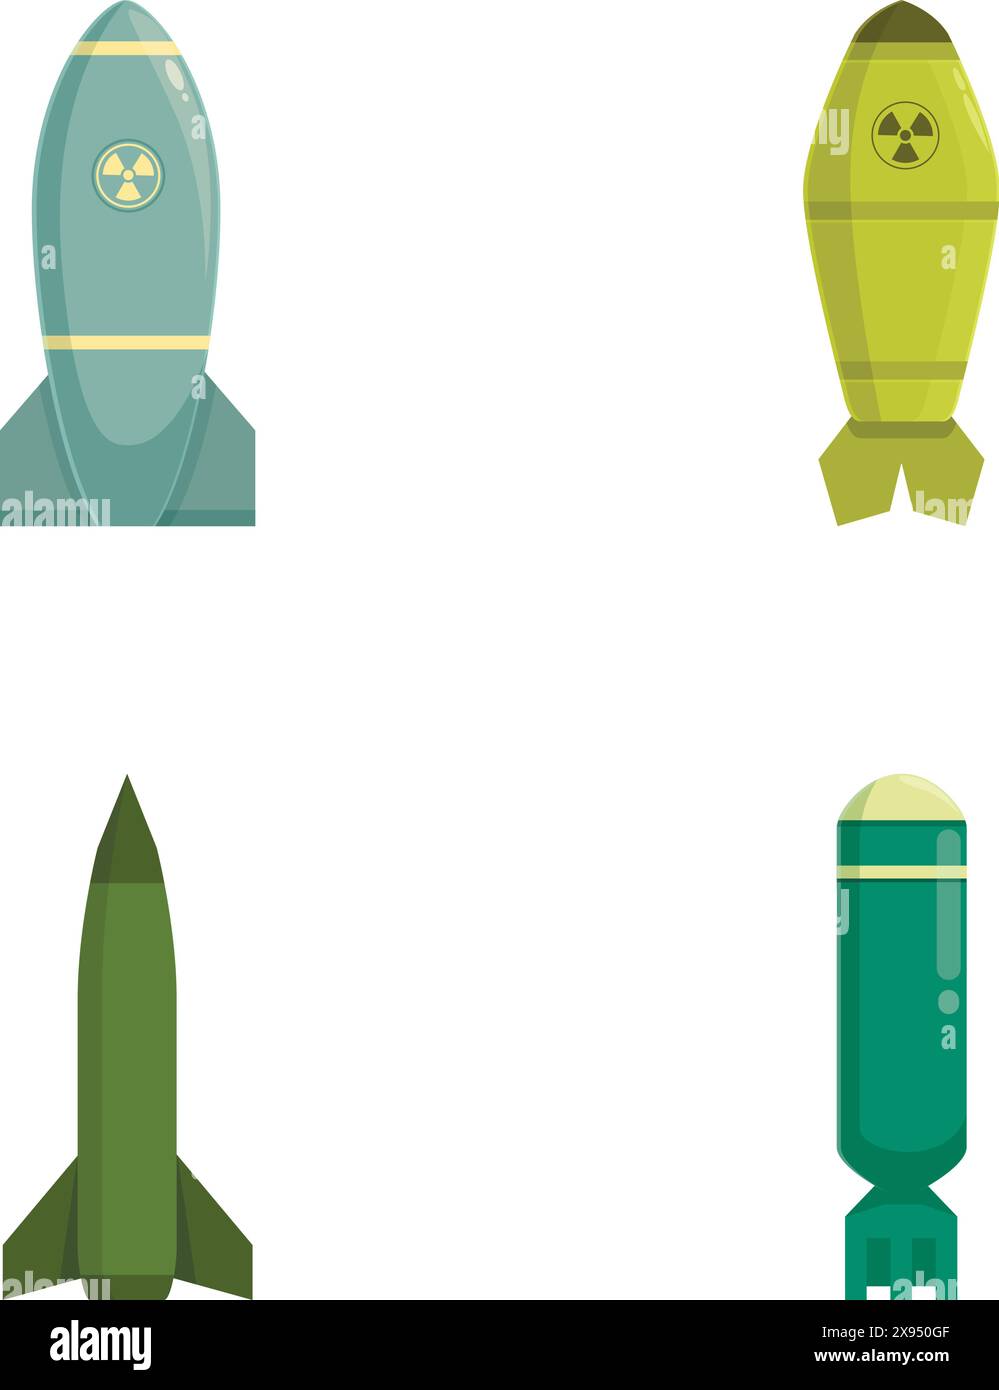 Set of various cartoonstyle missiles and bombs icons, ideal for military or strategy content Stock Vector